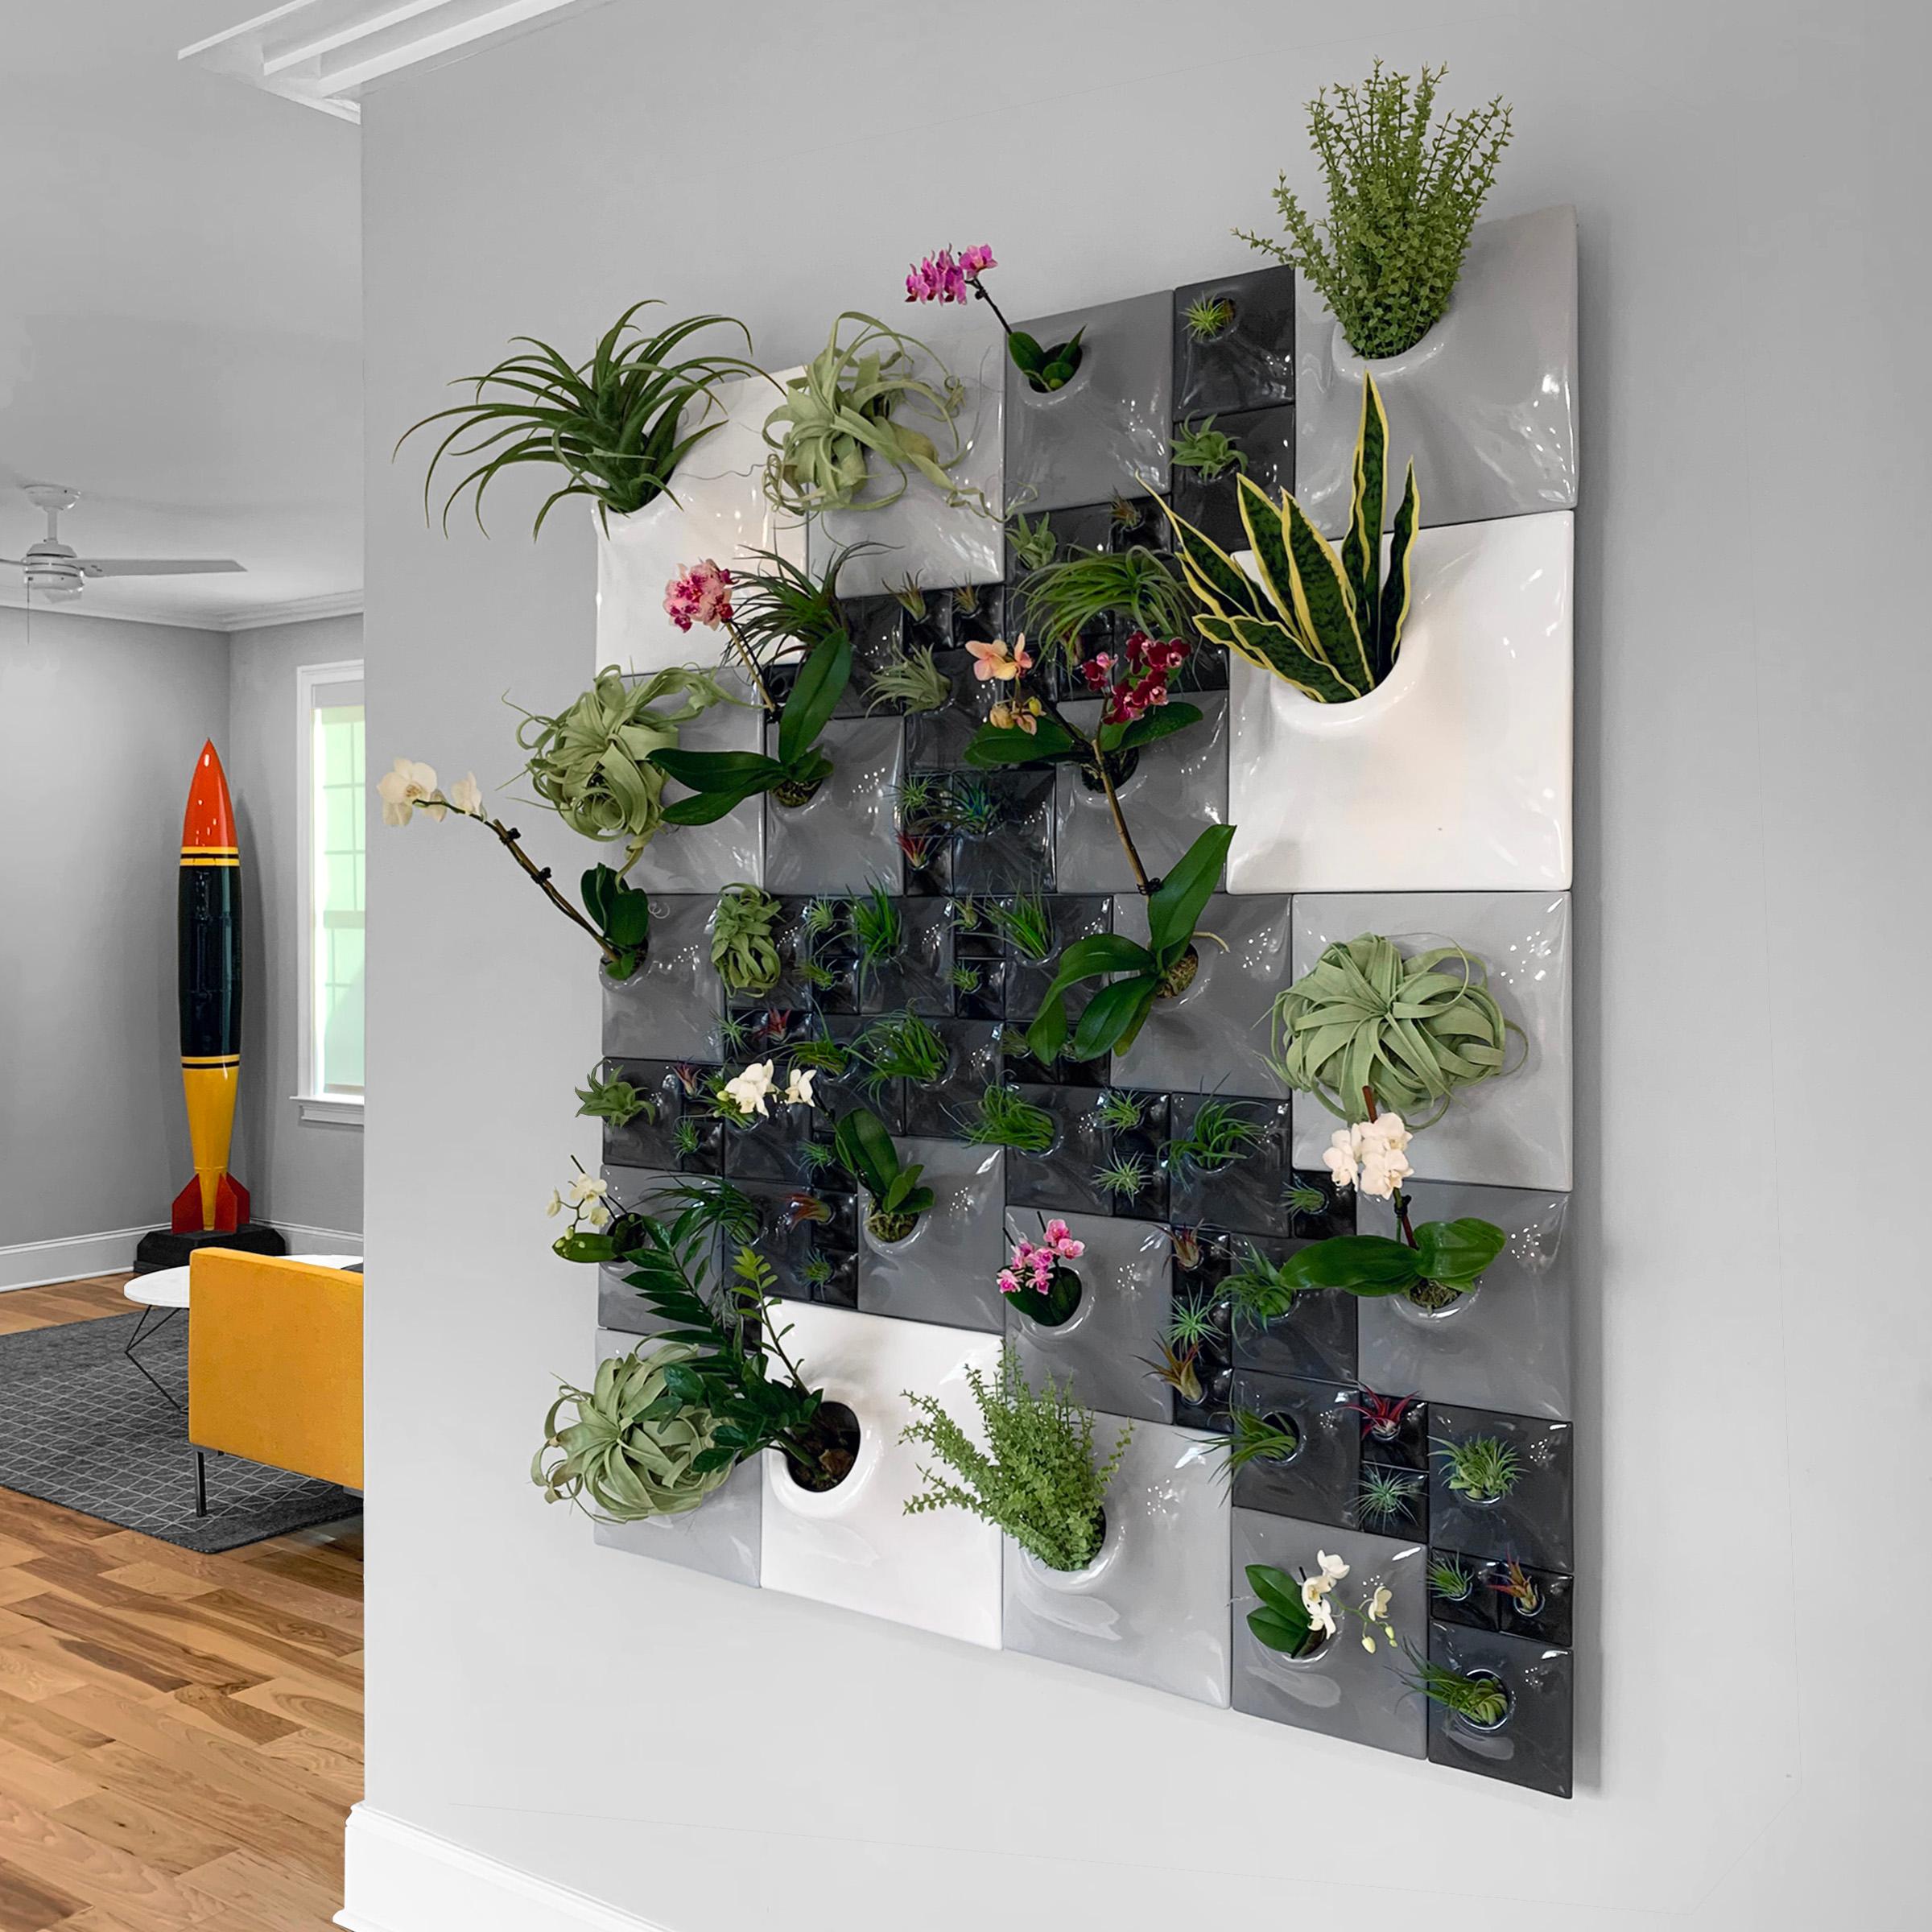 Modern Wall Sculpture, Wall Art Installation, Living Wall Decor, Price per Sq Ft

Transform your home, office, or restaurant into an awe inspiring epicenter of biophilic design with an undulating Node Plant Wall - the only modular ceramic wall